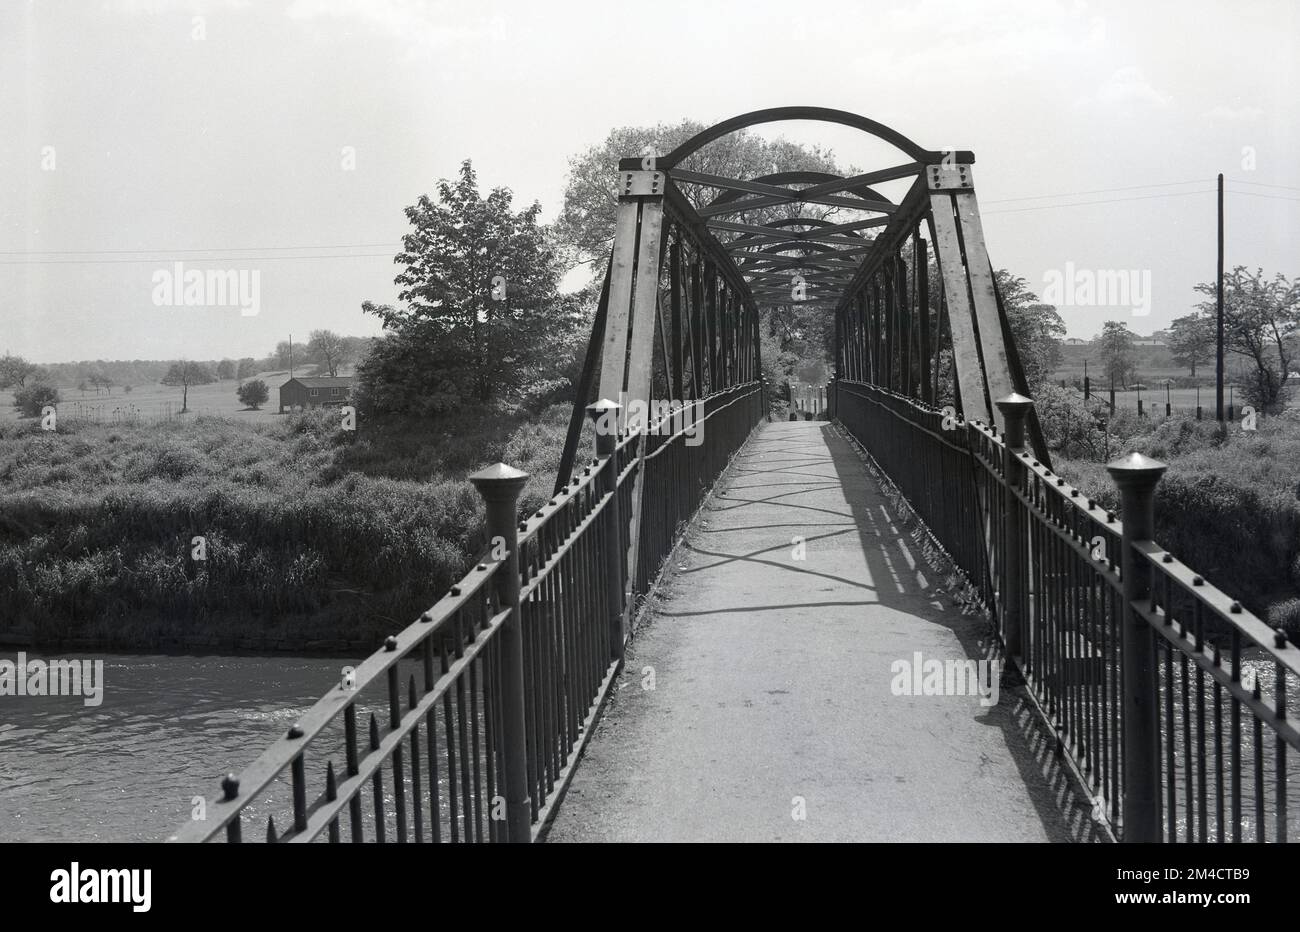 1950s, historical, Ford Bridge, Northenden Ford, Didsbury, Manchester, England, UK. The crossing is more commonly known as Simon Bridge, as its construction was funded by a local man Henry Simon. The iron footbridge over the River Mersey was built at the site of an old ford in 1901 to improve access to an area of land known as Poor's Field, as this land provided rents to the local church.  Historically the ford was a gateway into and out of the city of Manchester. Stock Photo